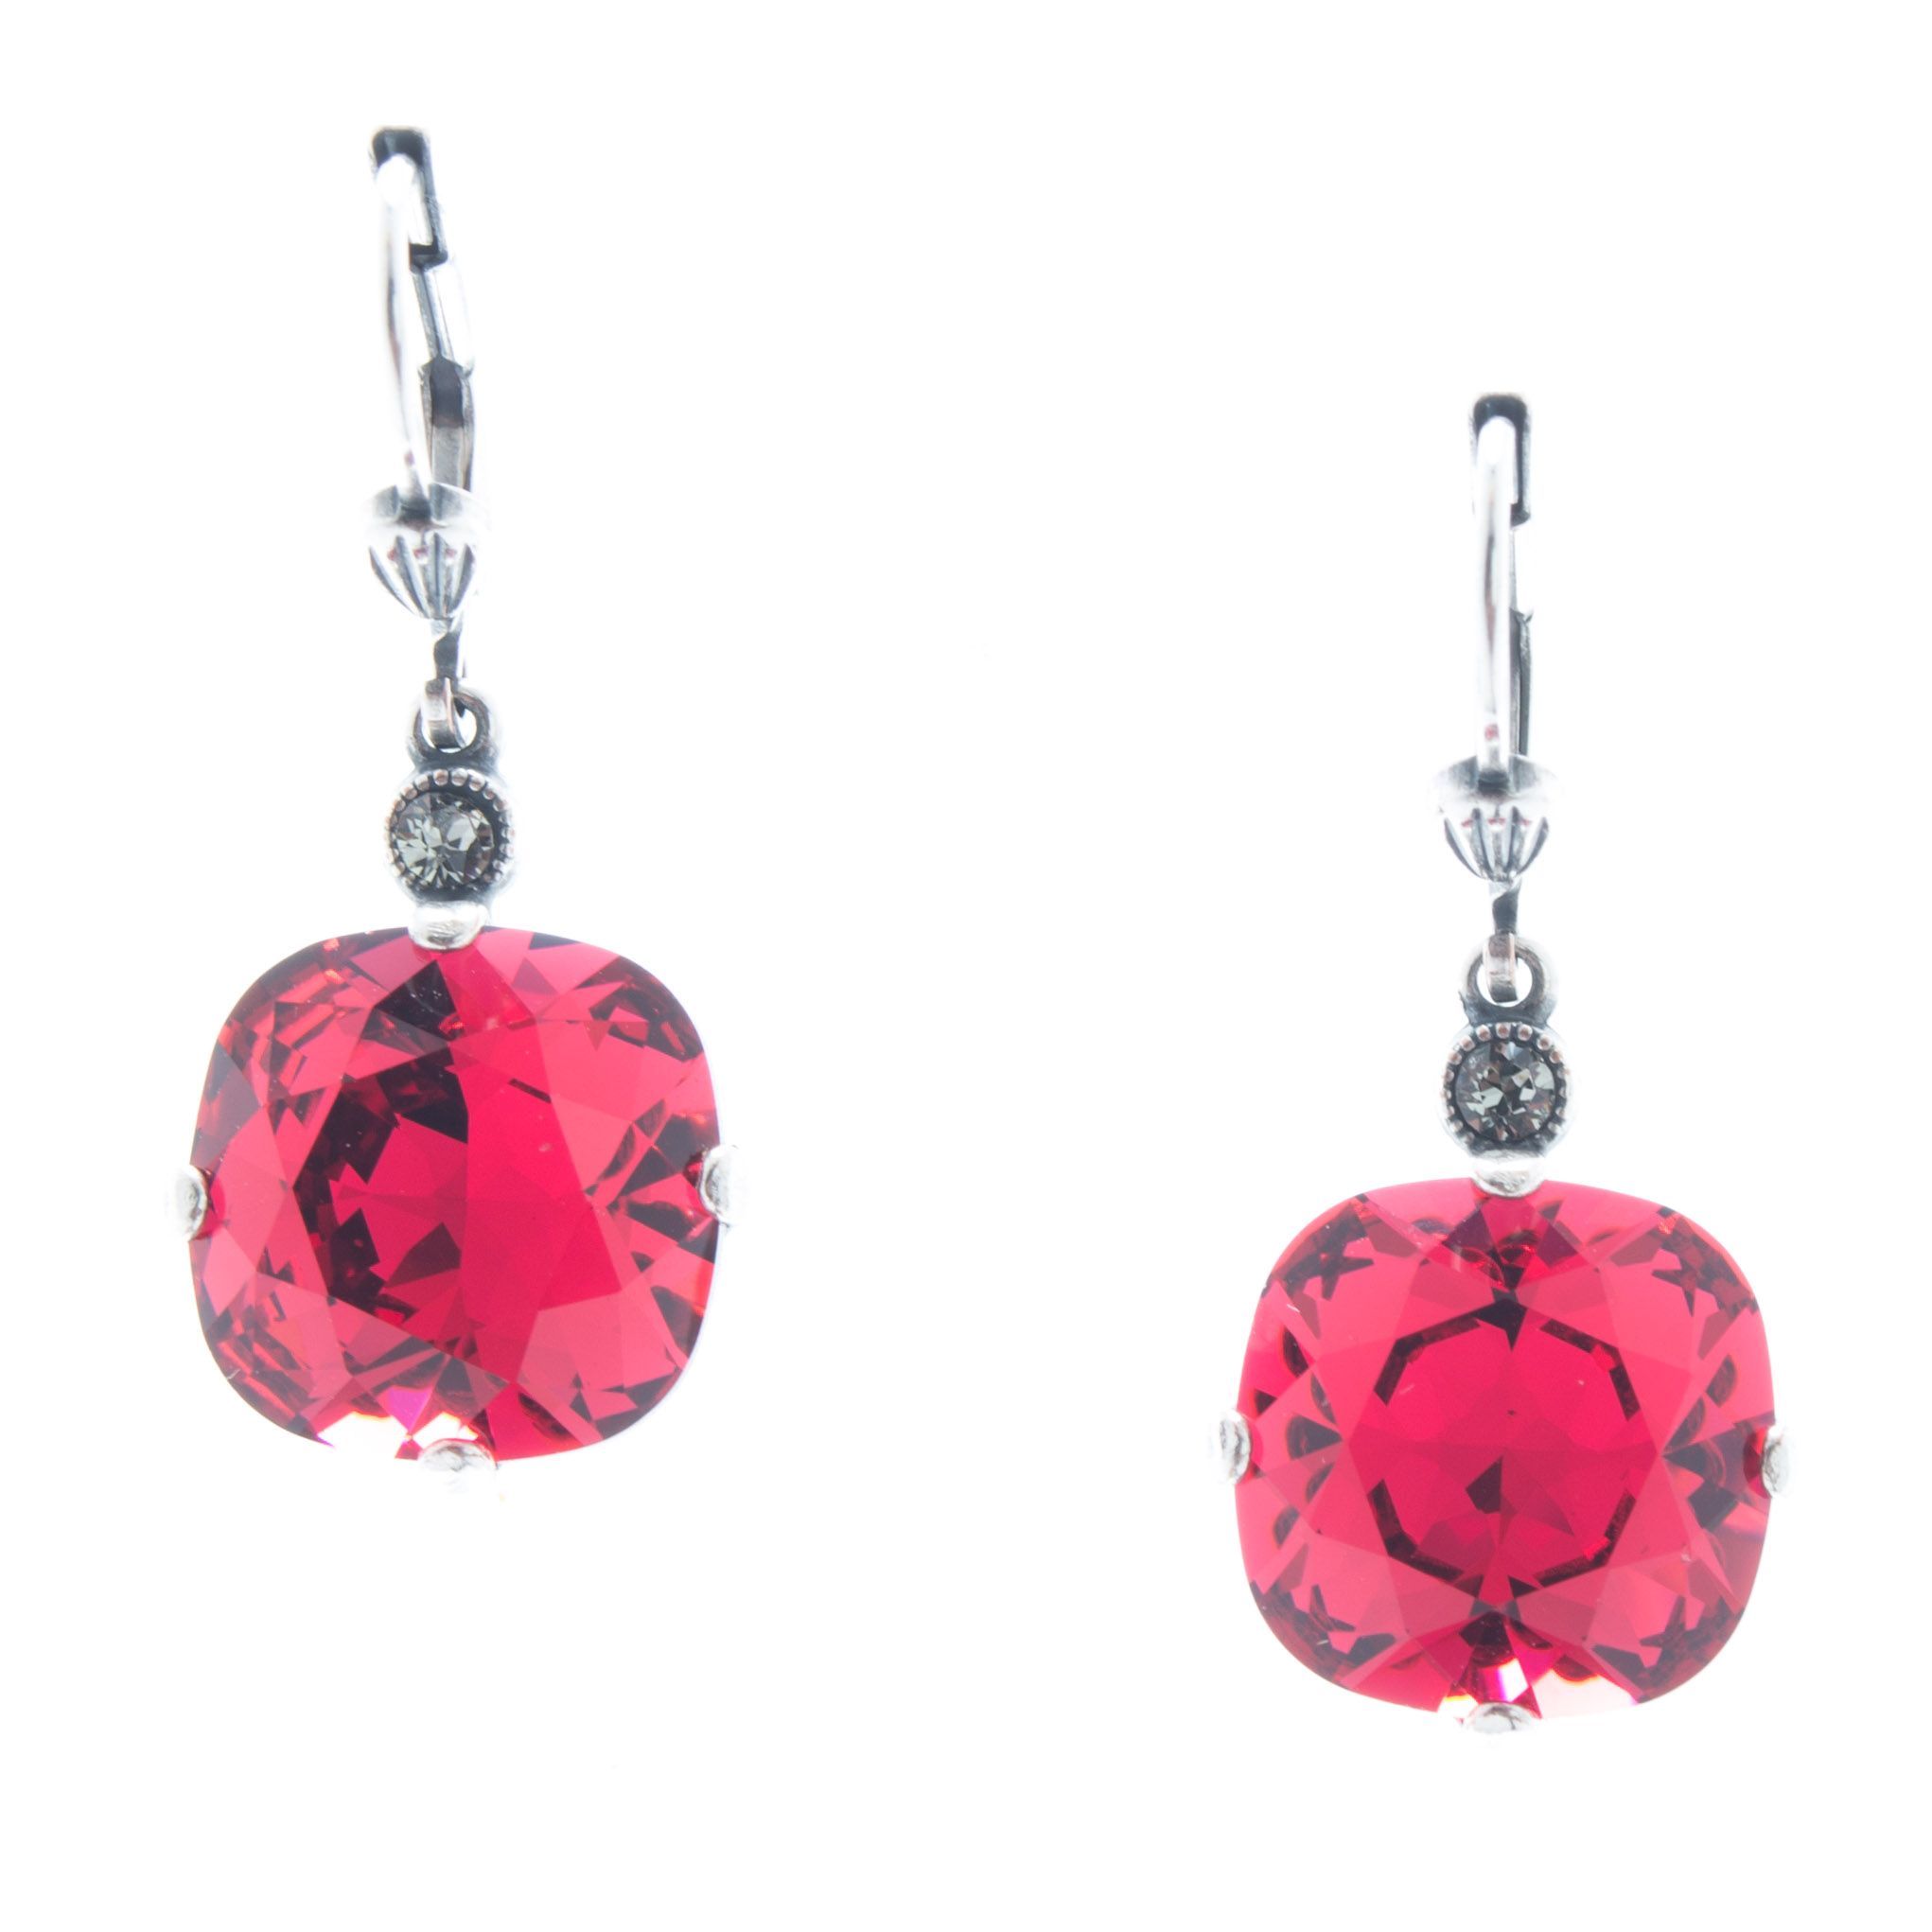 Catherine Popesco 12mm Large Stone Crystal Earrings - Scarlet Red